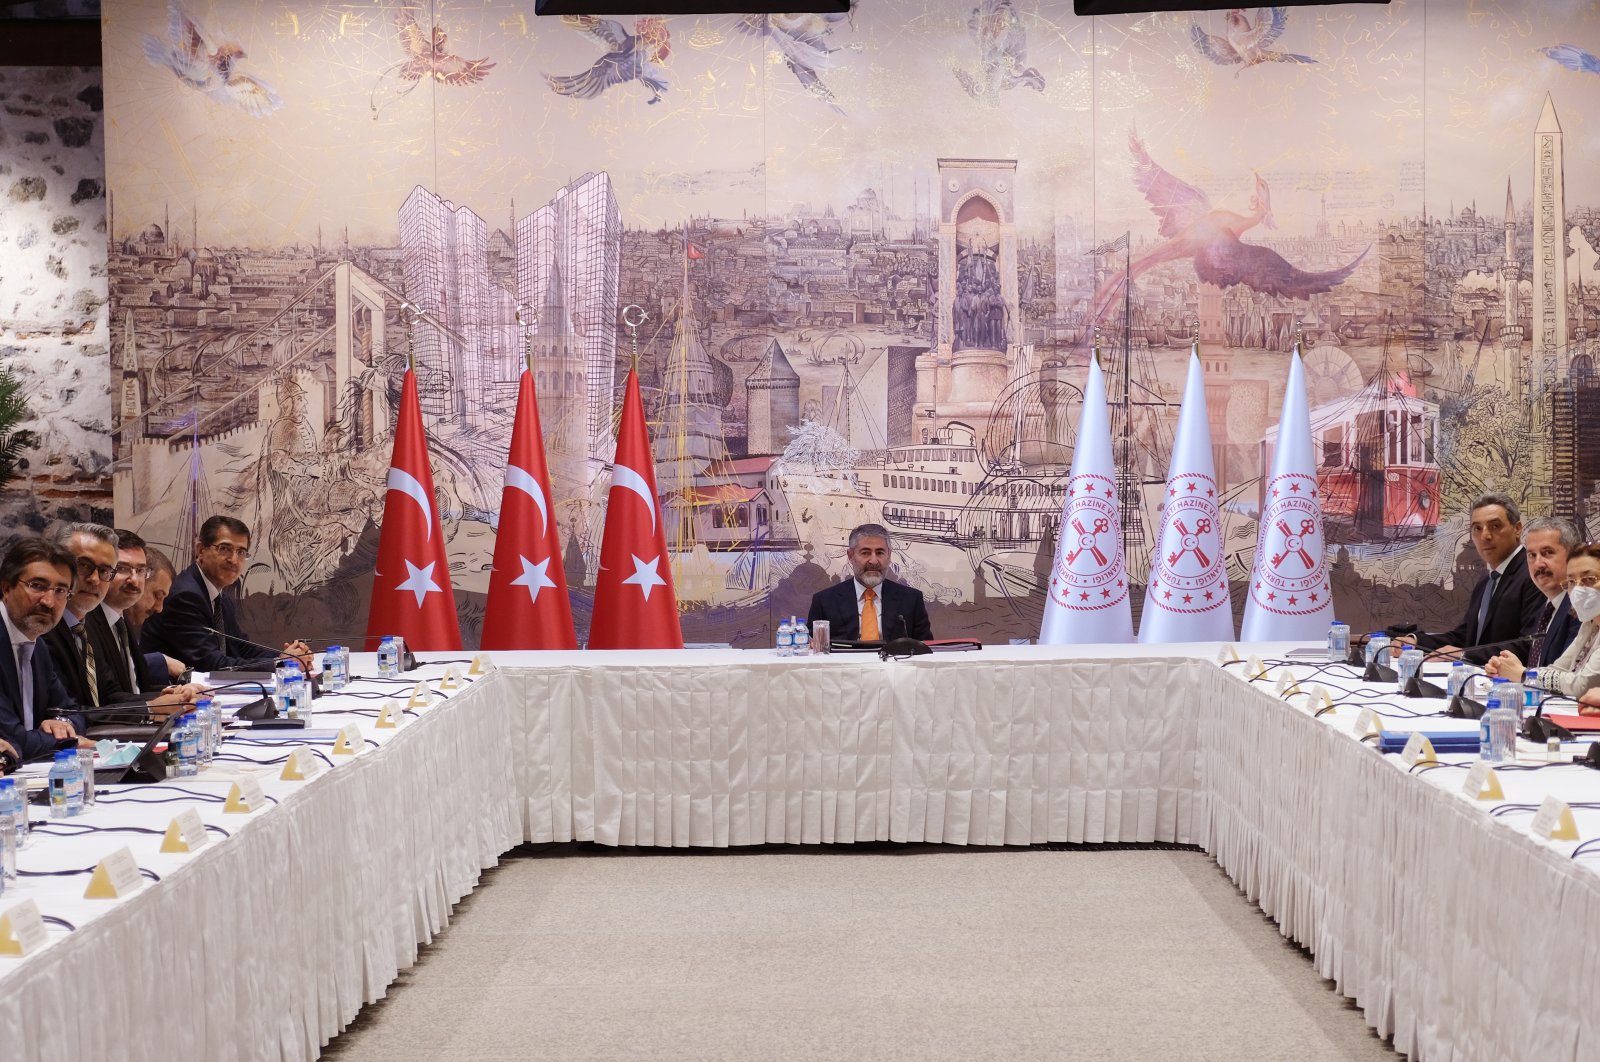 Treasury and Finance Minister Nureddin Nebati (C) chairs the Financial Stability Committee meeting in Istanbul, Turkey, July 25, 2022. (Treasury and Finance Ministry via AA)